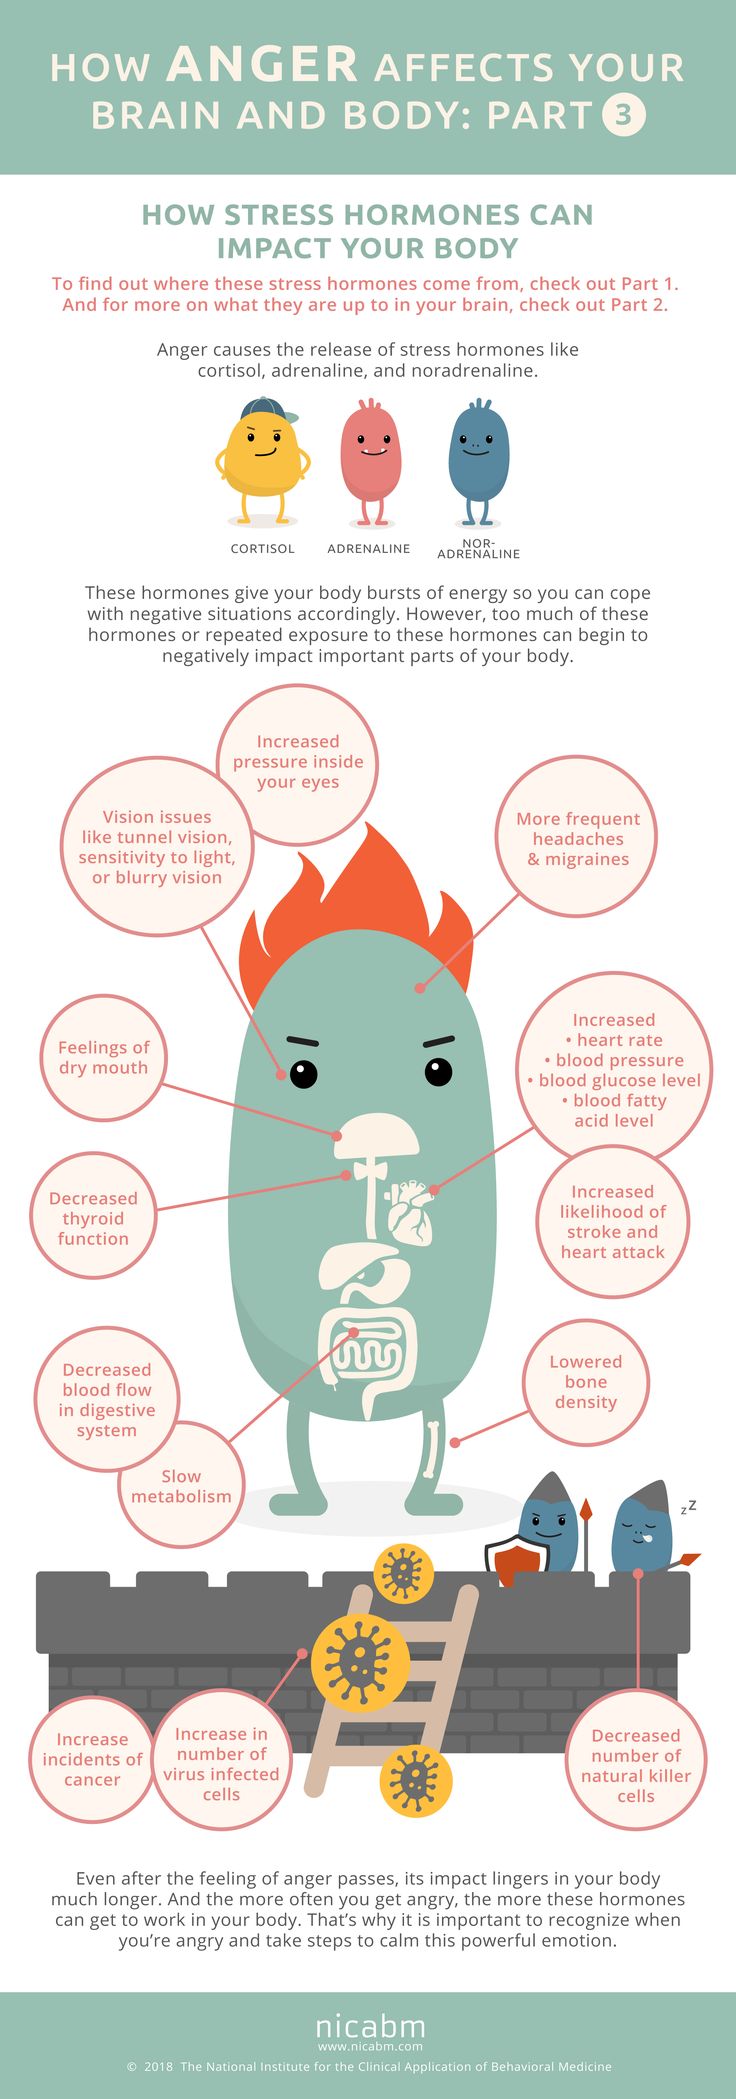 Psychology-Infographic-How-Anger-Affects-Your-Brain-and-Body-Infographic-Part-3 Psychology Infographic : How Anger Affects Your Brain and Body [Infographic - Part 3]